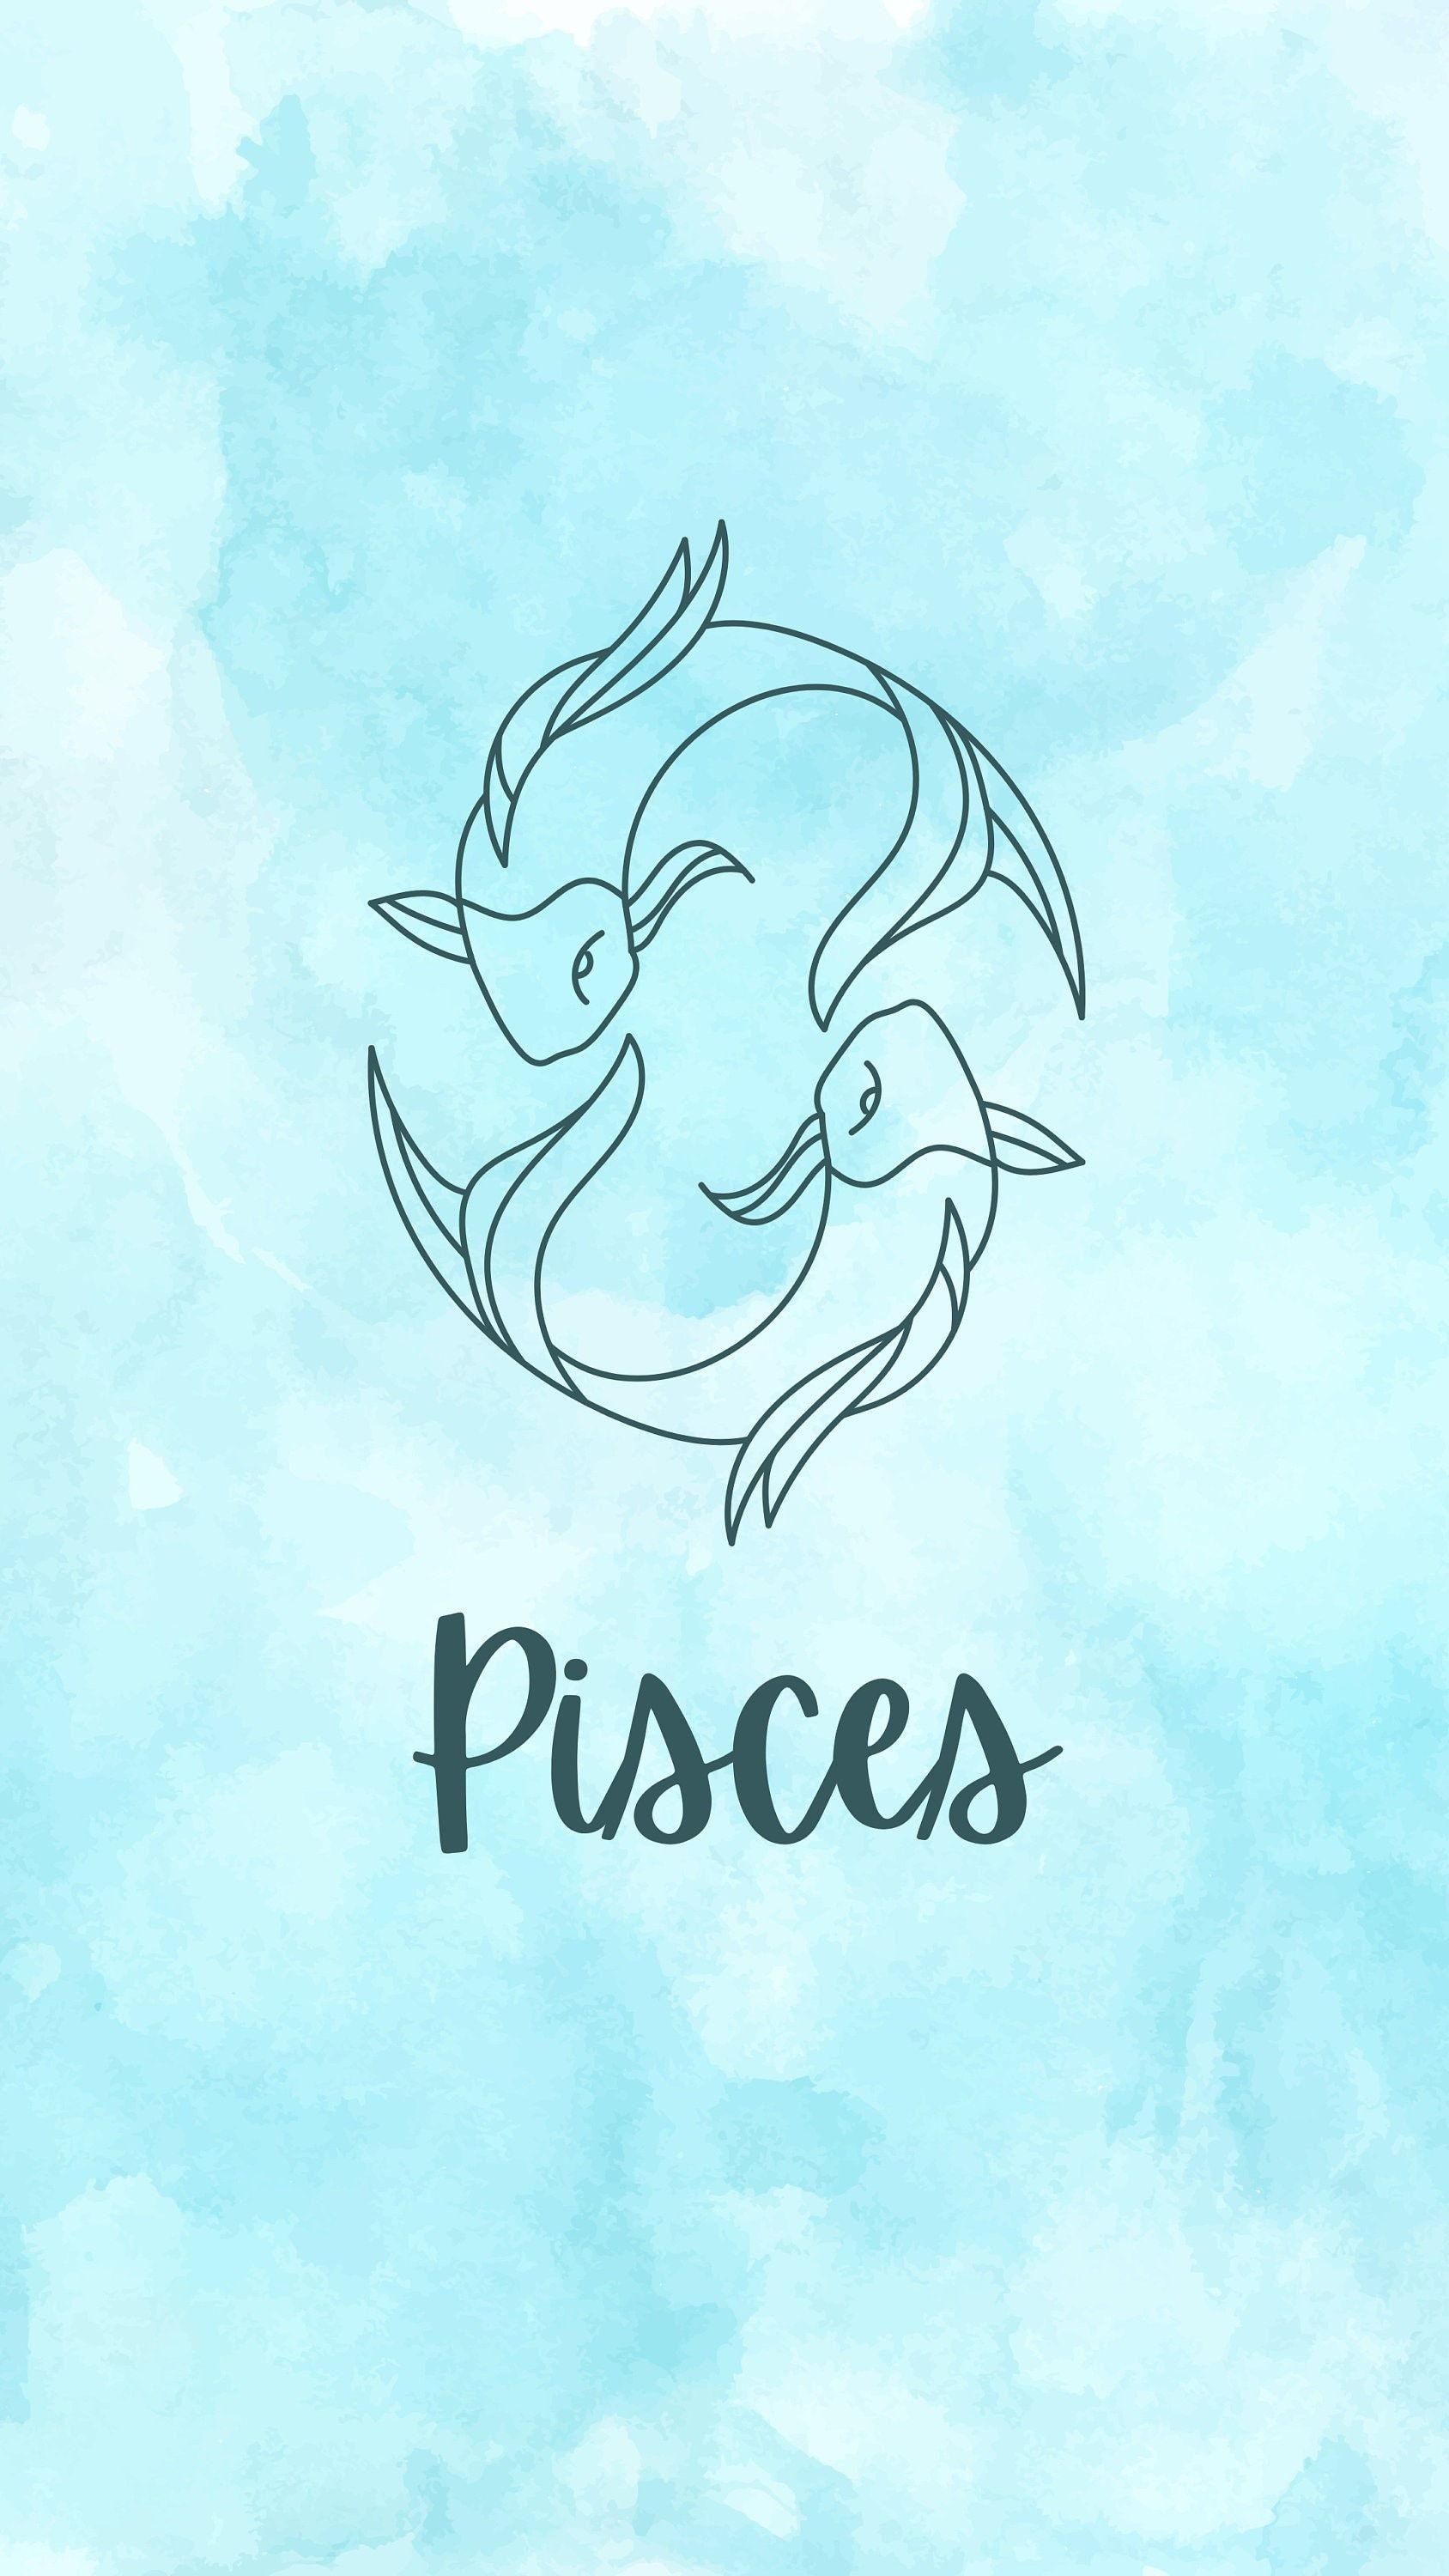 A logo for pisces with two birds and watercolor background - Pisces